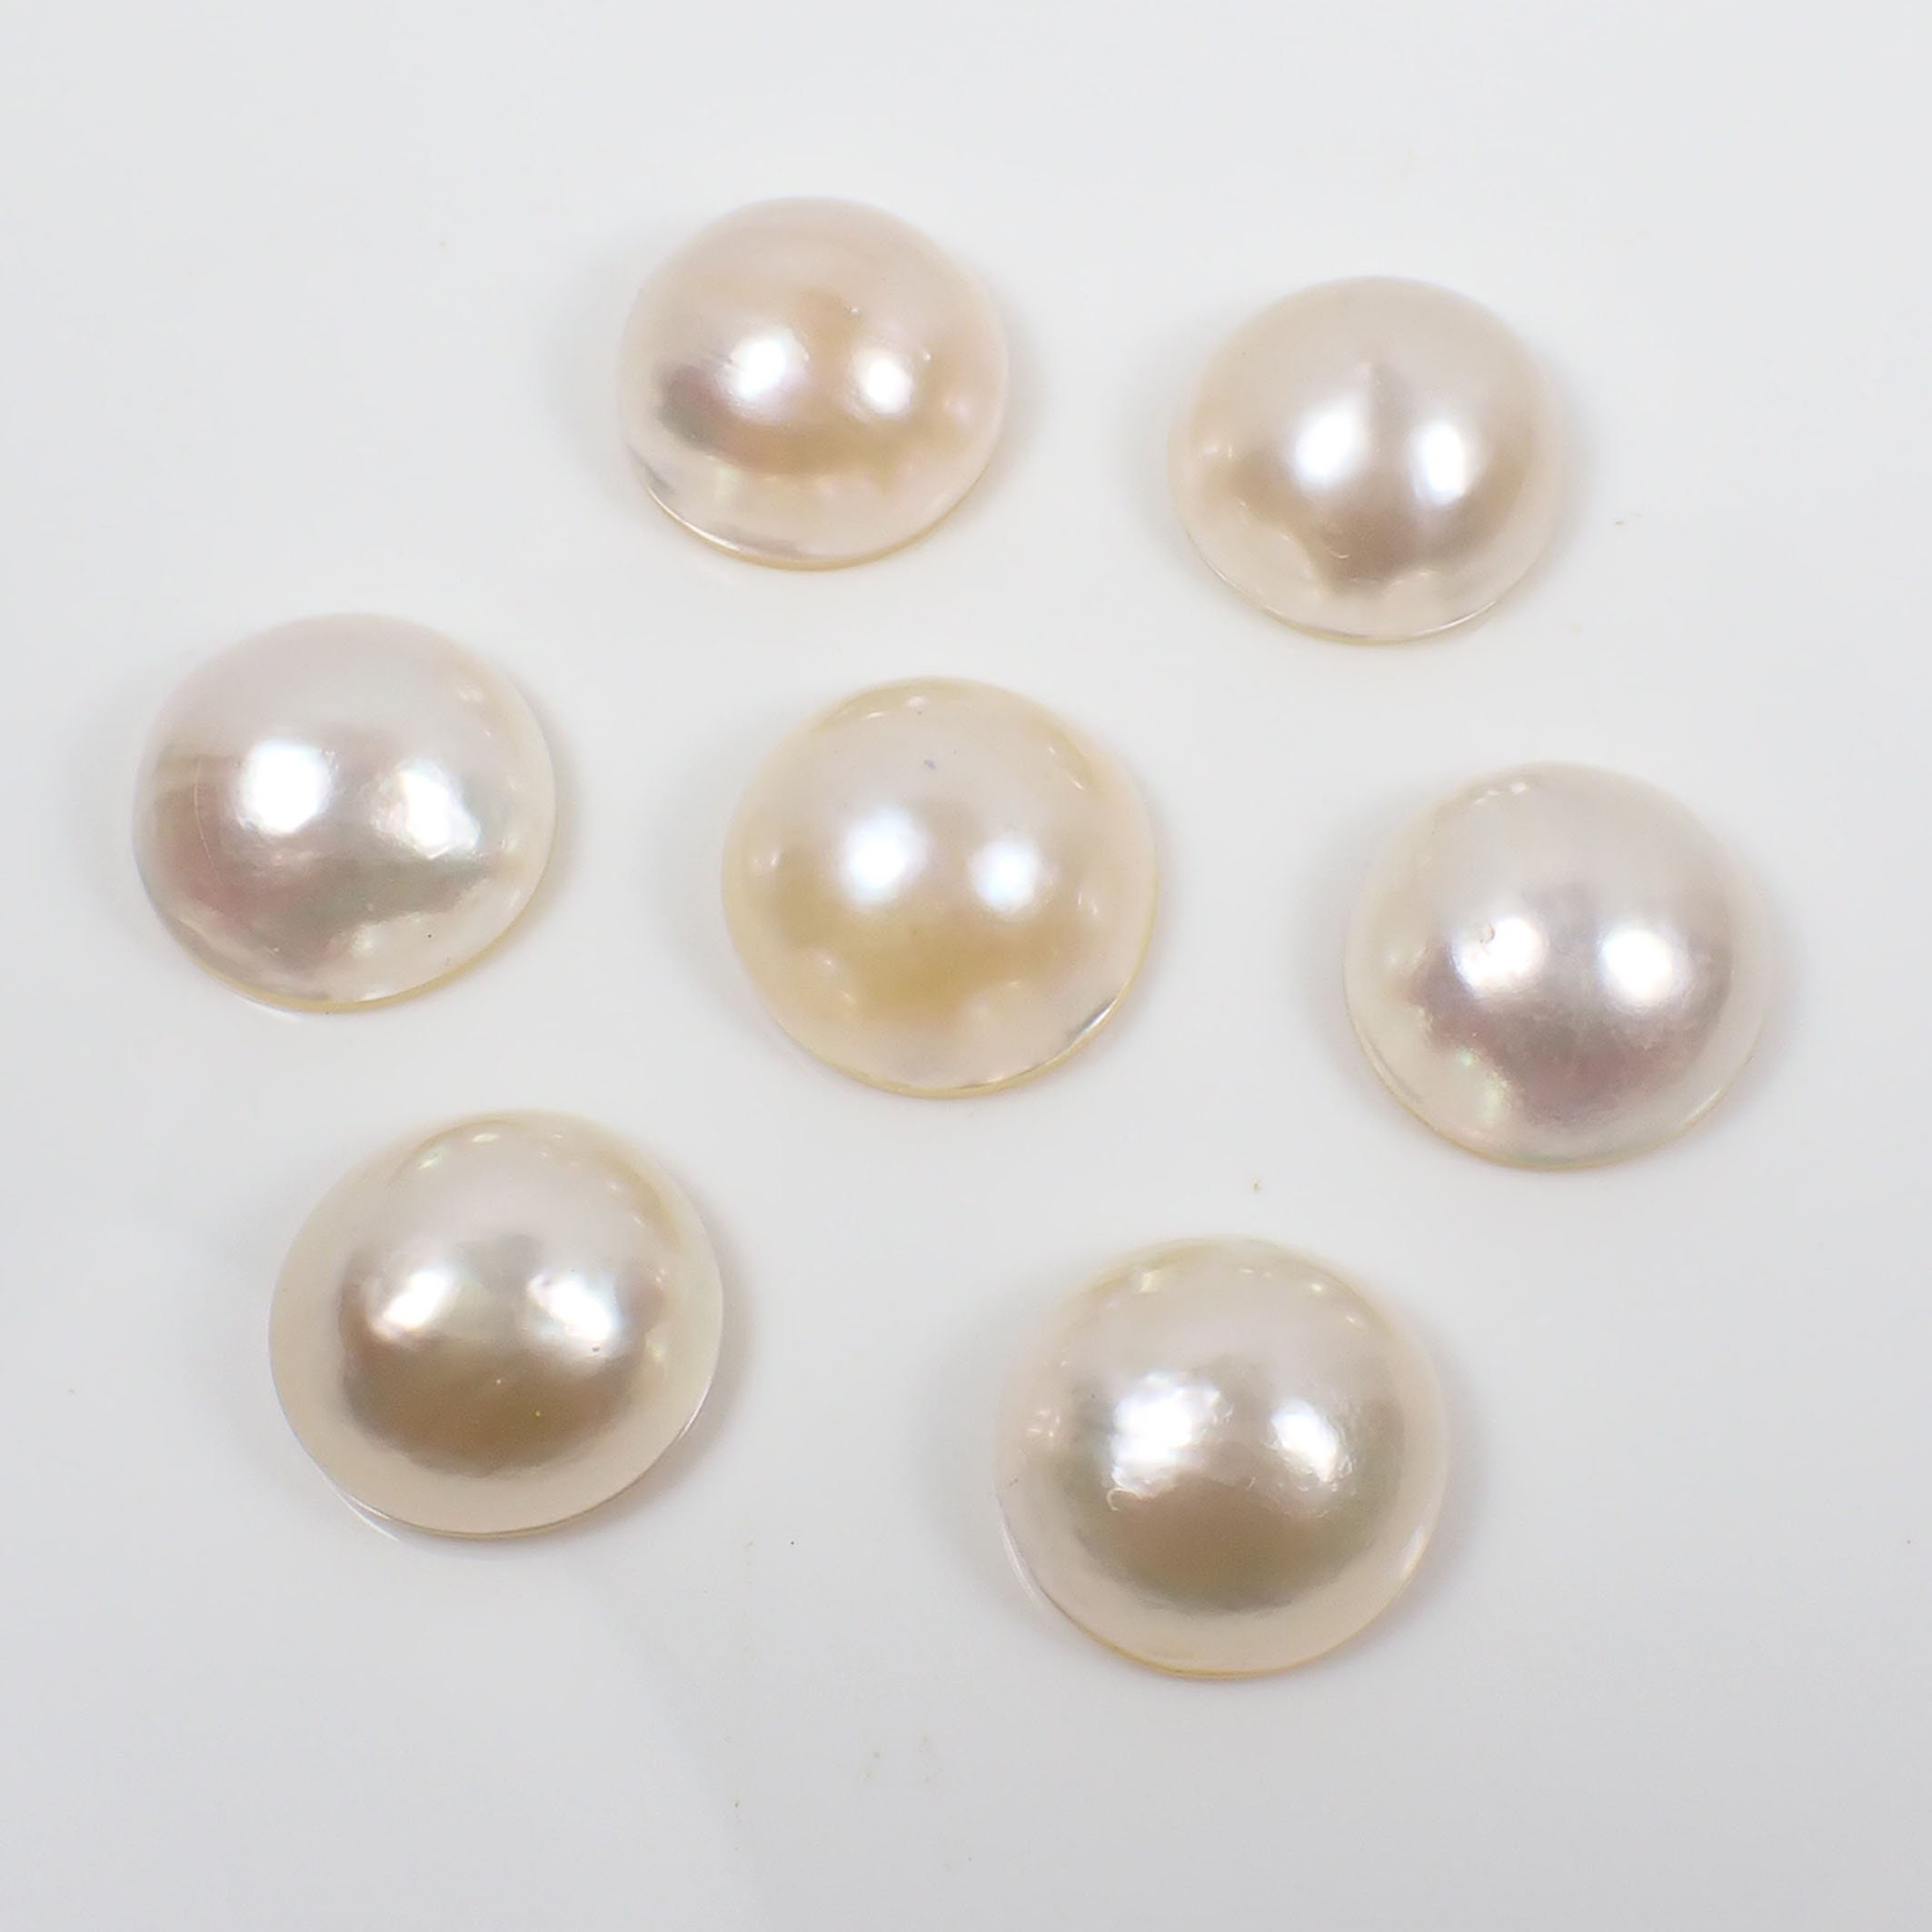 Red Flat Back Faux MIXED Size Half Pearls 60 Grams 3mm, 4mm, 5mm, 6mm, 8mm,  10mm Half Round Embellishments, Diy, Crafts 